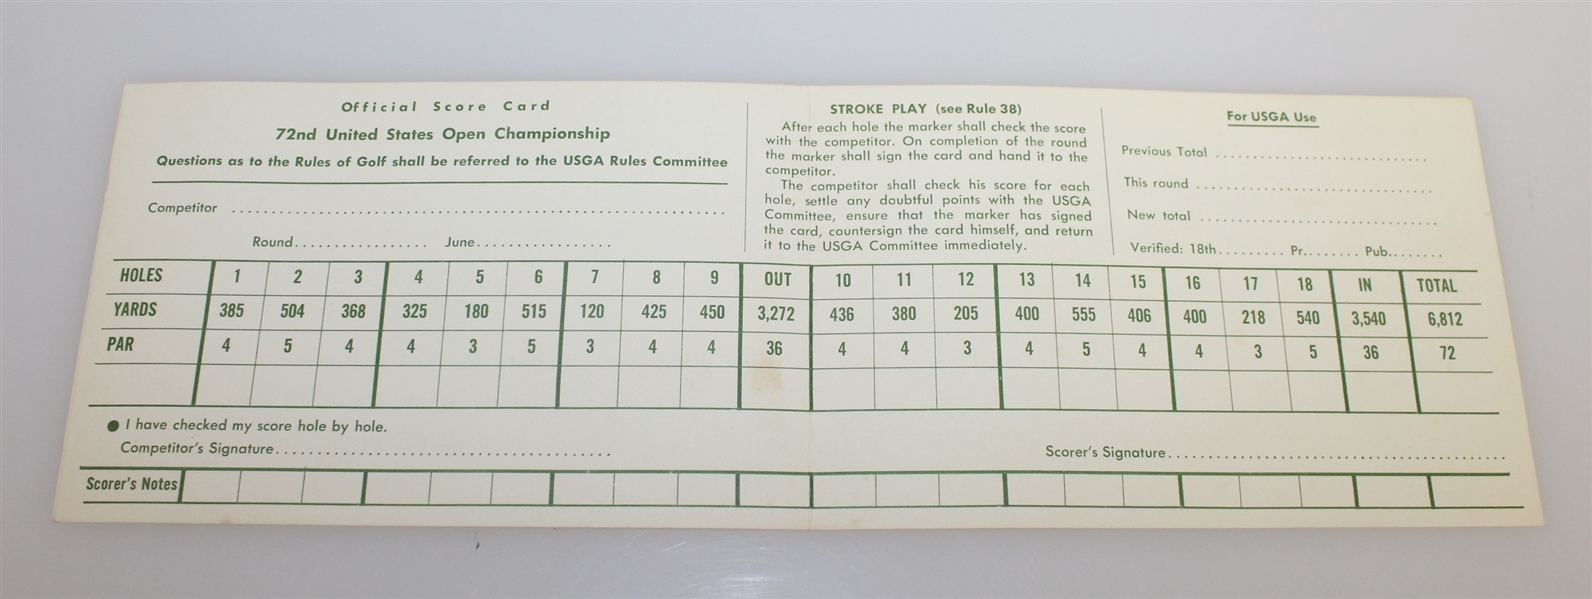 1972 US Open at Pebble Beach Official Scorecard - Jack Nicklaus Win